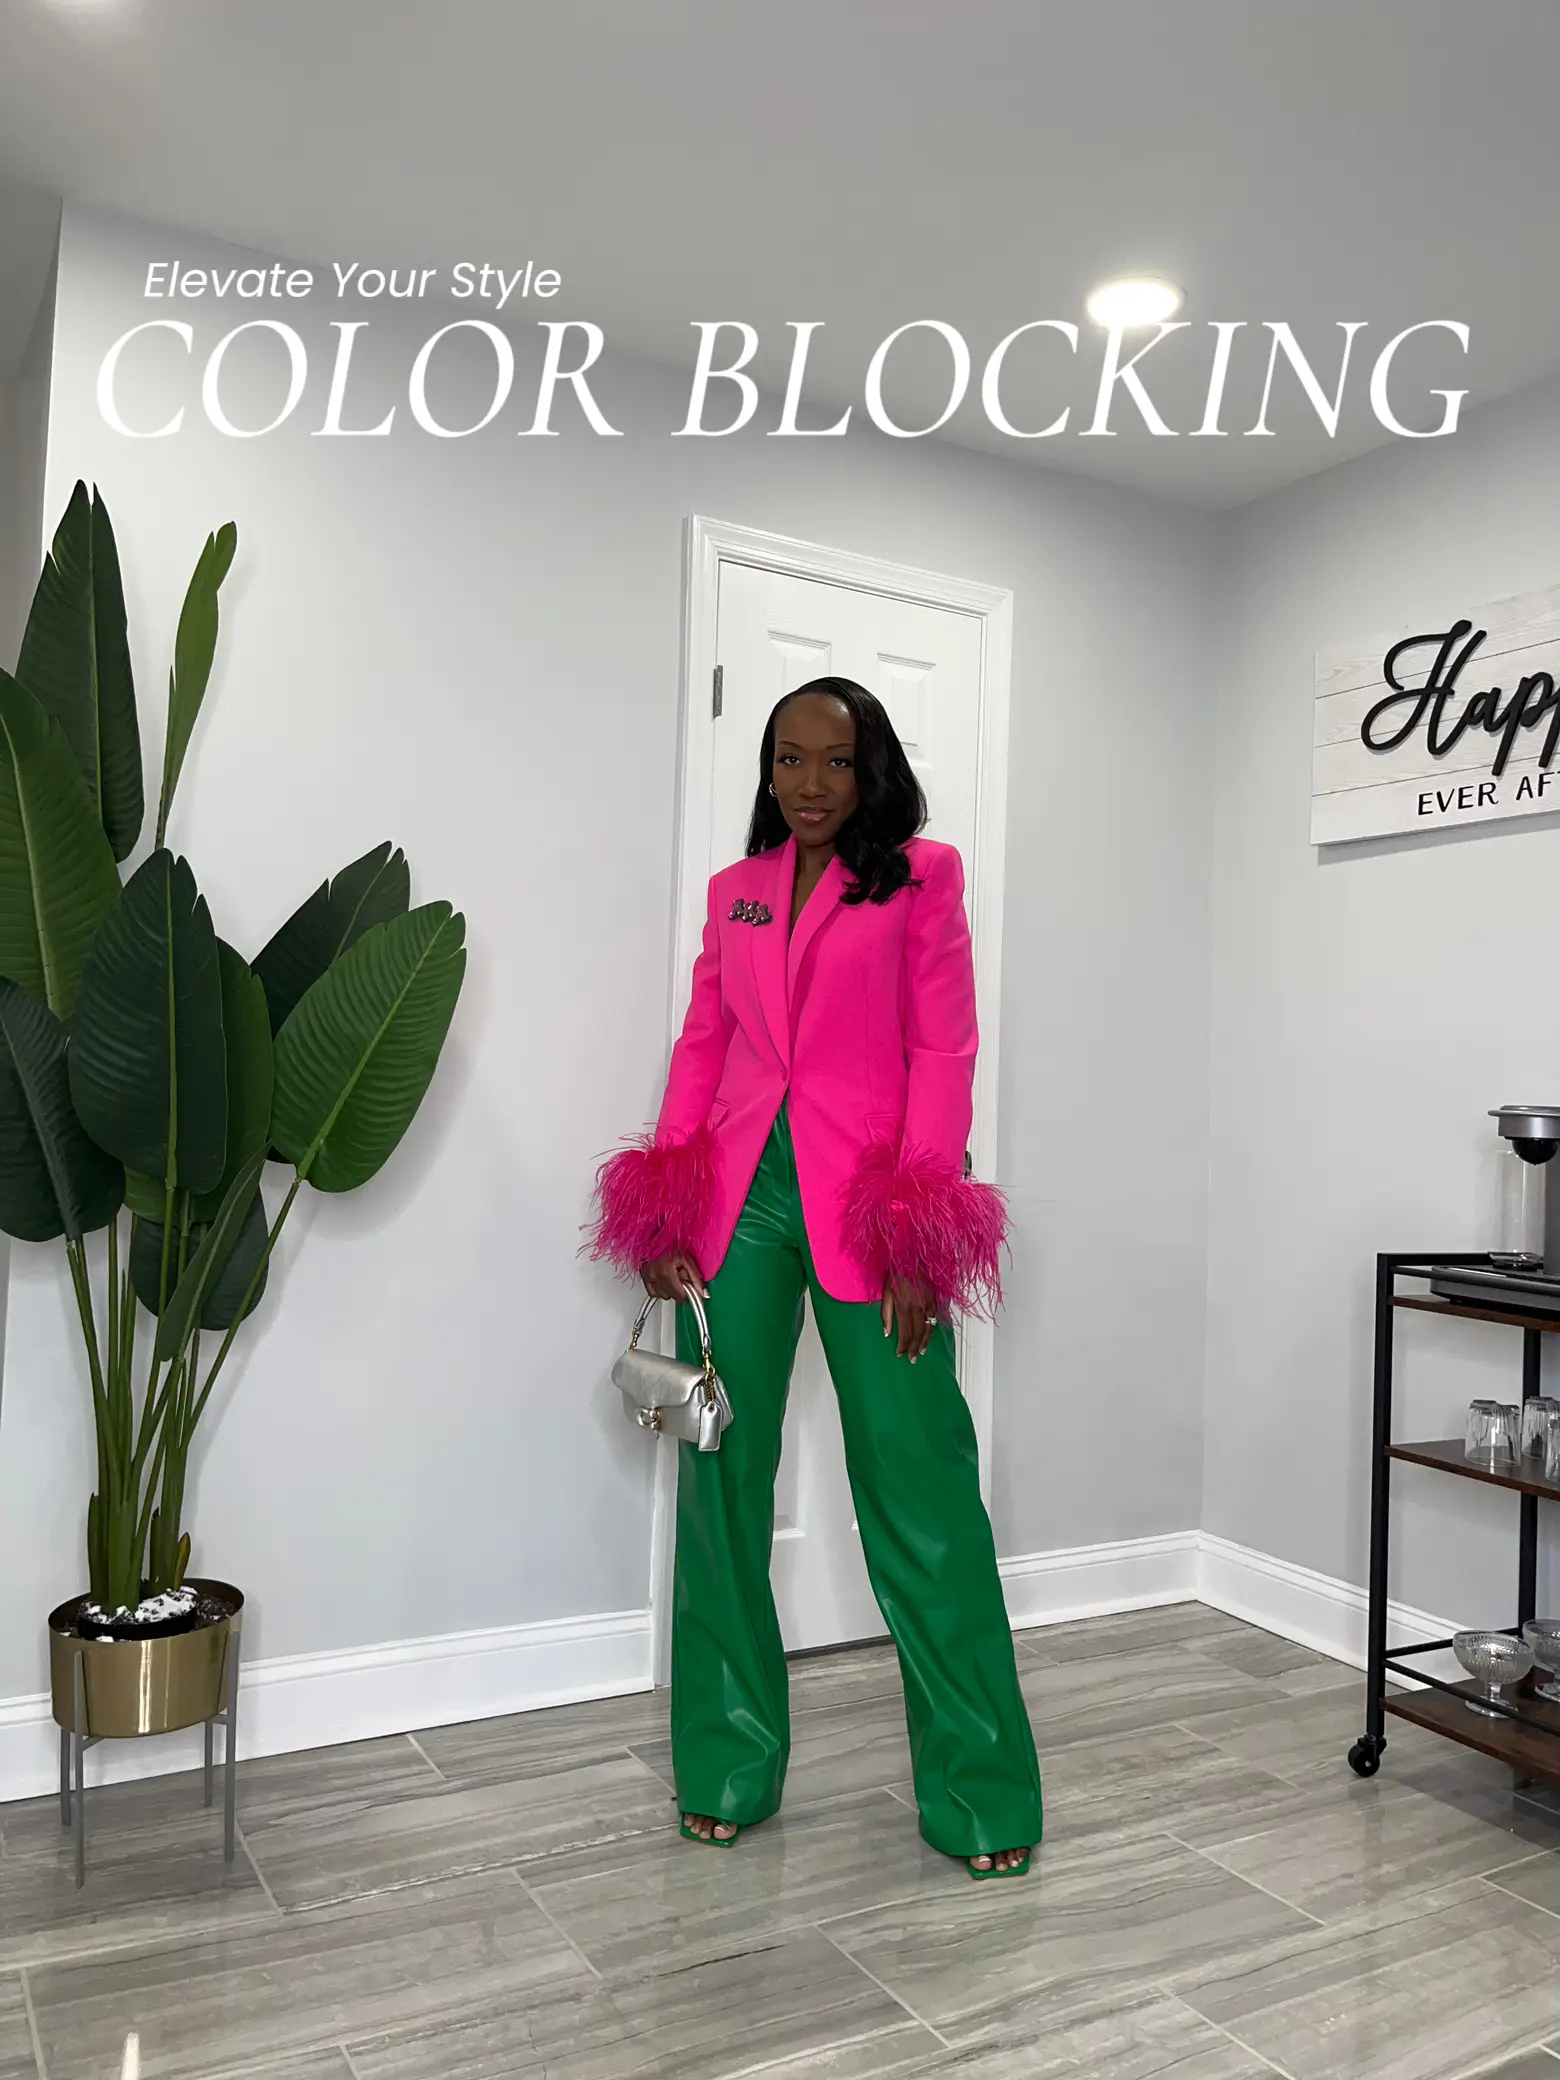 How to Color Block Your Outfits with Style - Gabrielle Arruda